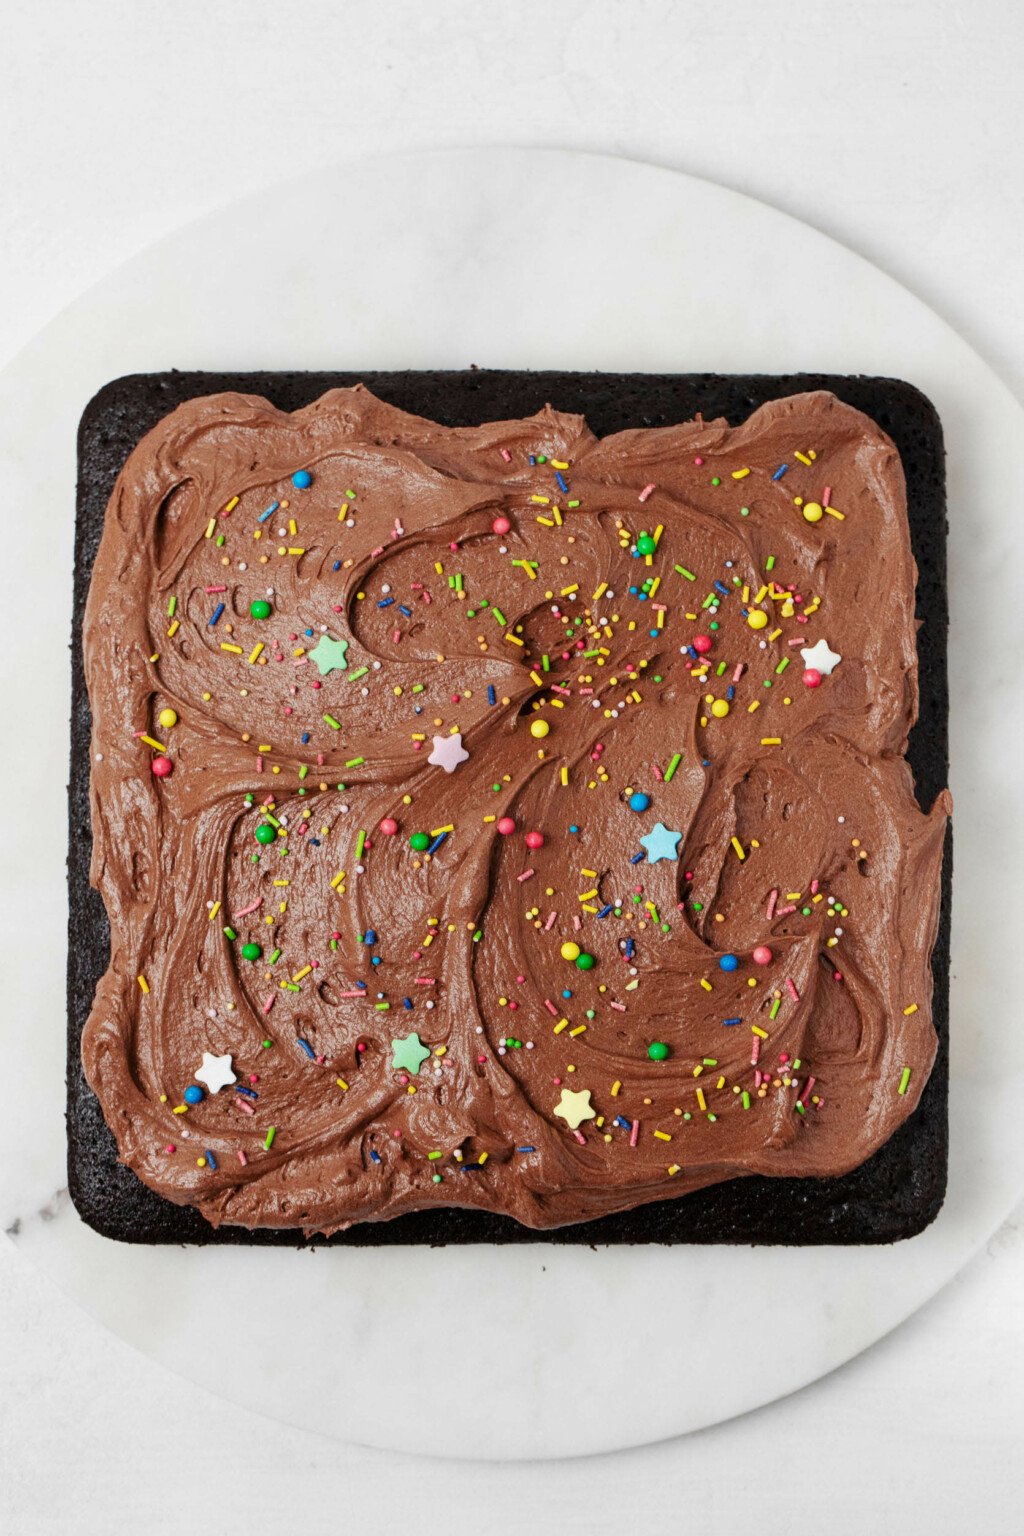 A square vegan chocolate snack cake has been decorated with buttercream frosting and sprinkles. It's resting on a white surface.